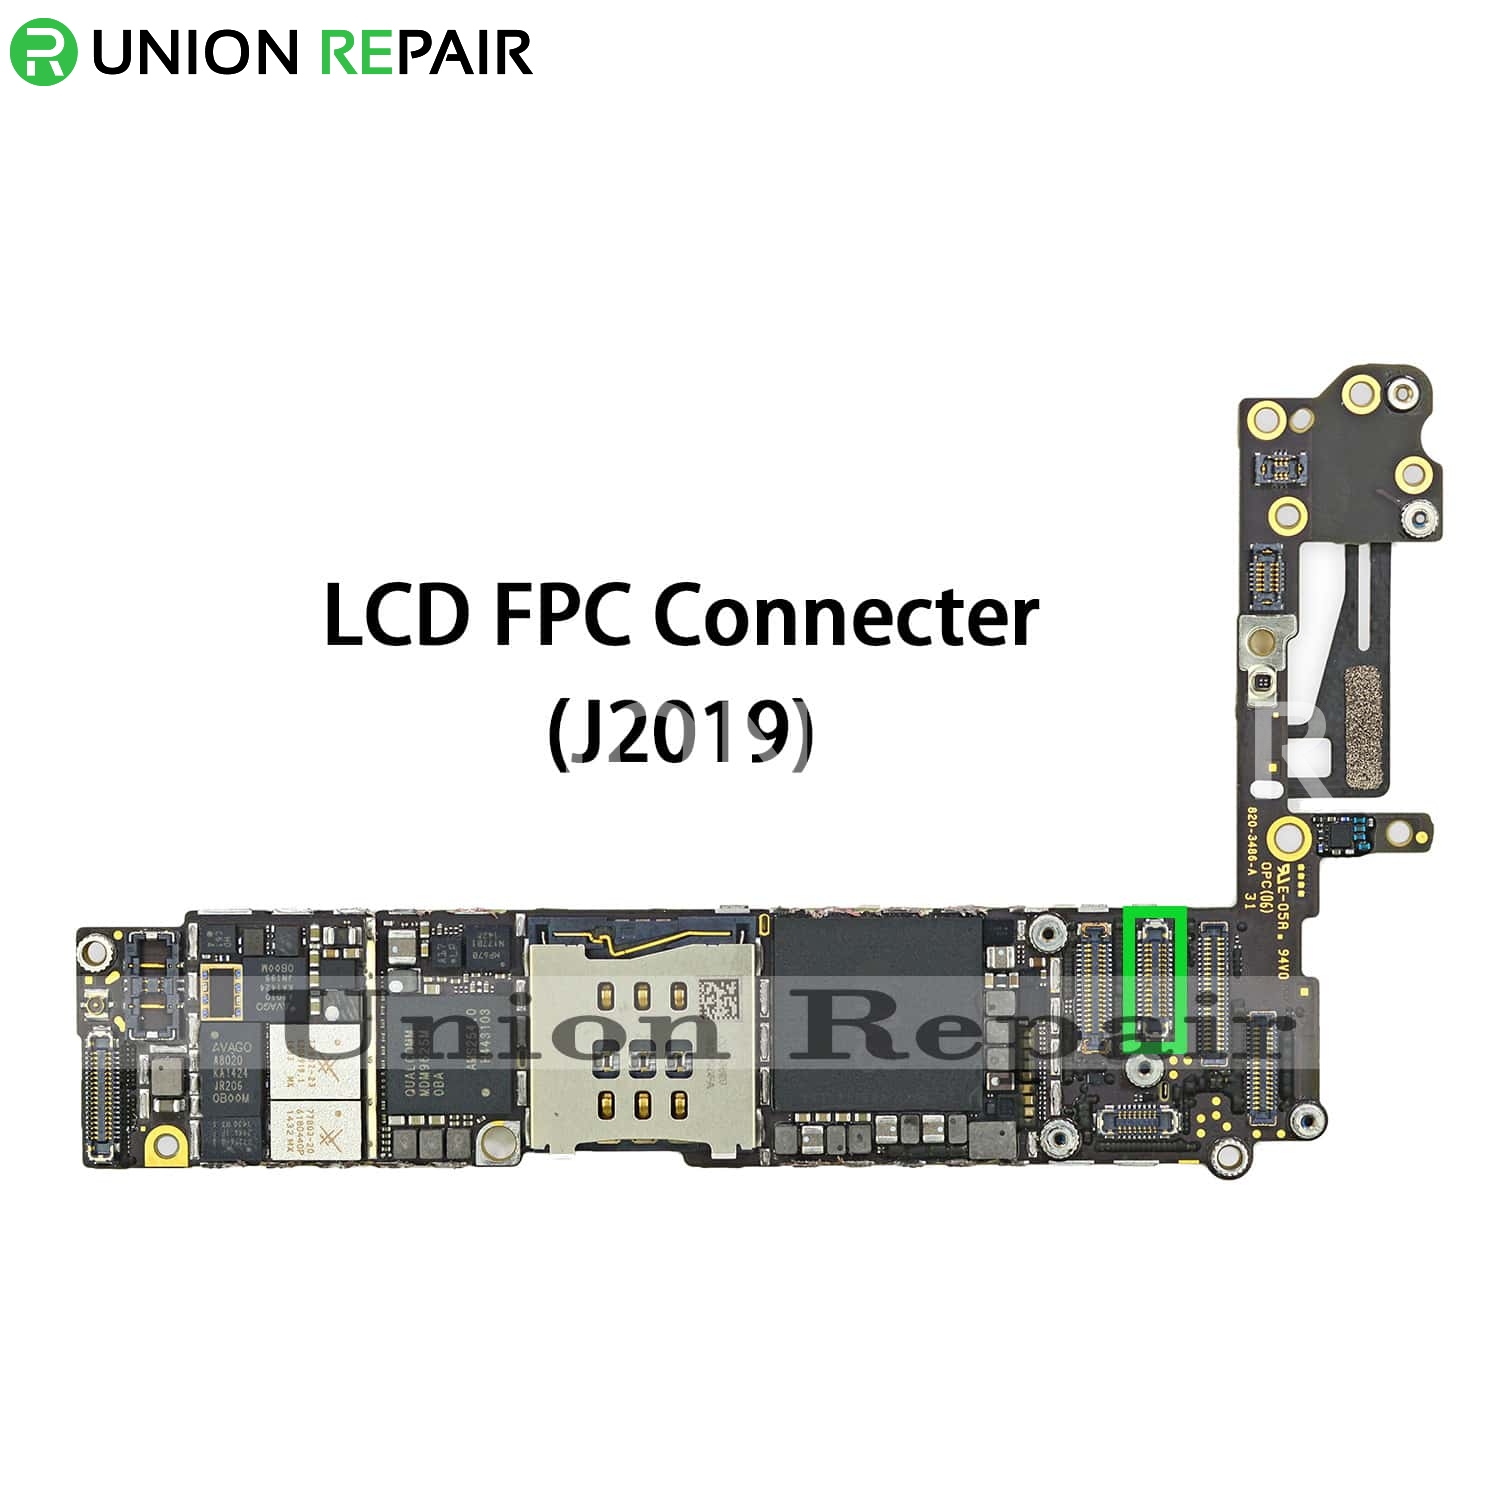 Replacement for iPhone 6 LCD Connector Port Onboard